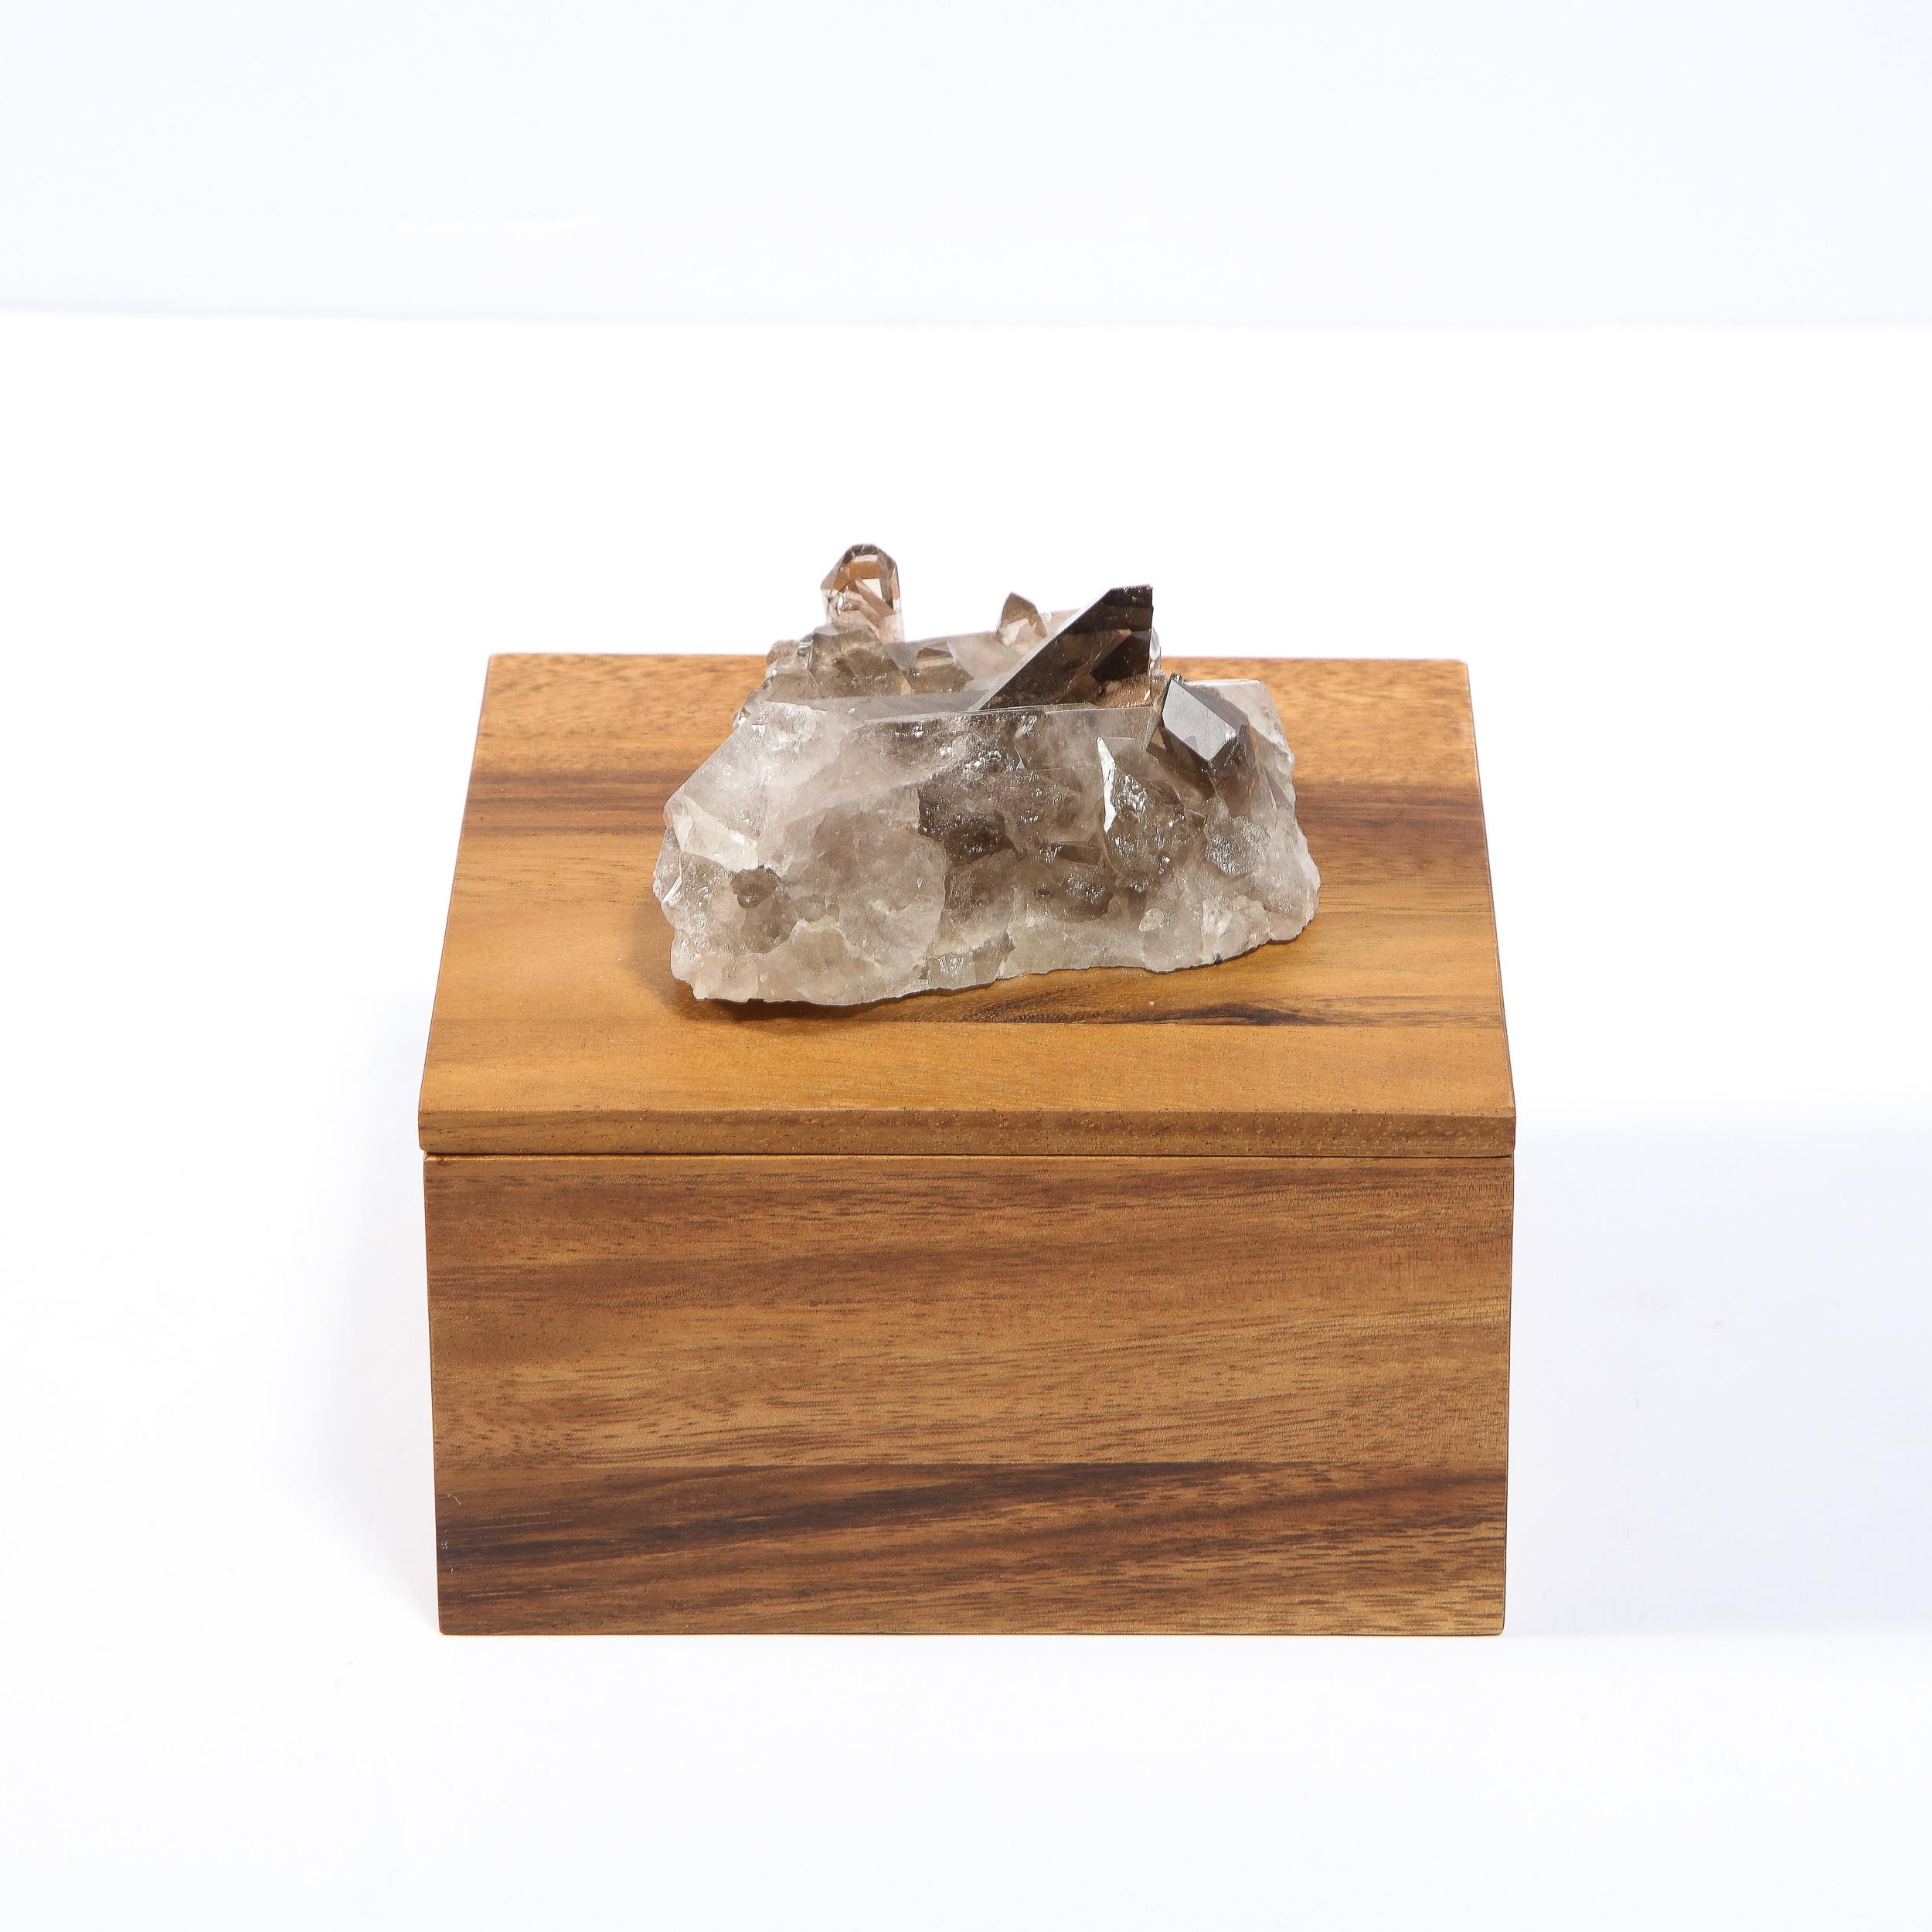 This sophisticated modernist box was realized in the United States during the 21st century. It features a cubic body in bookmatched walnut with an embellishment (that doubles as a handle) in beautiful organic smoky quartz that offers a striking